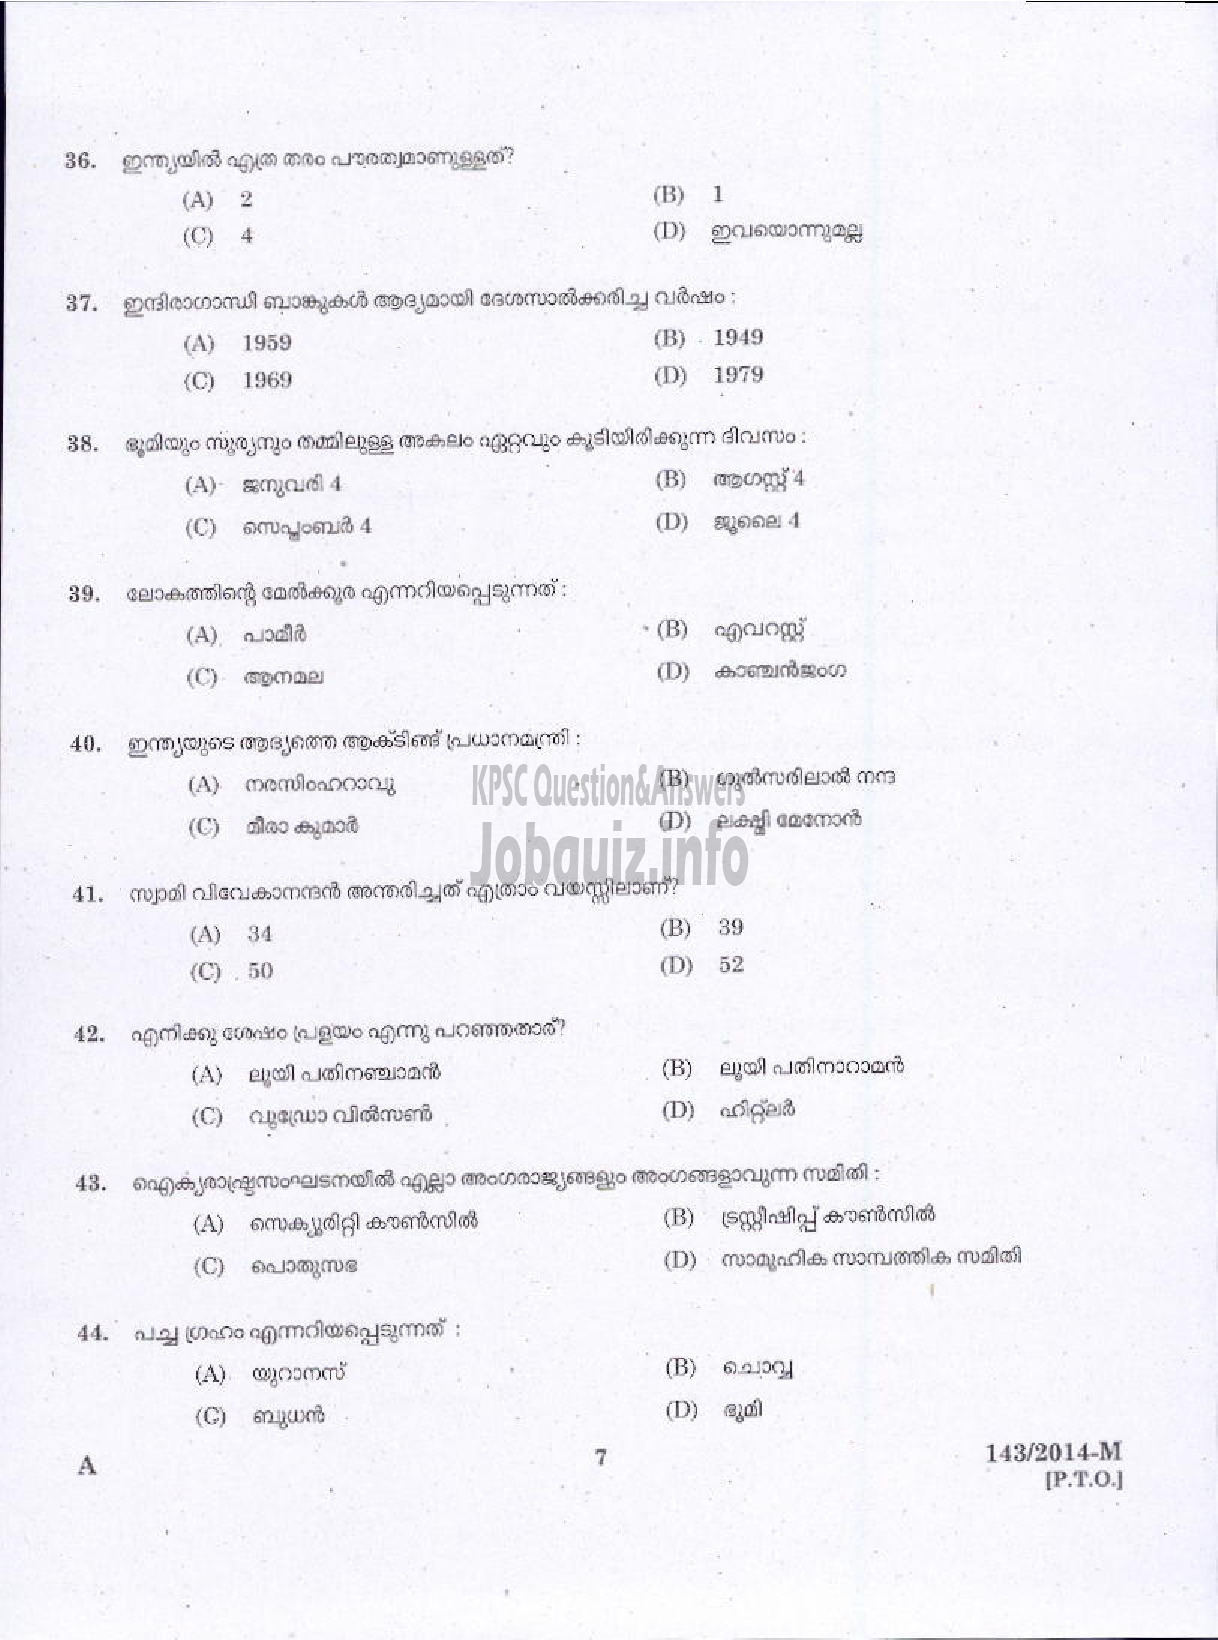 Kerala PSC Question Paper - WOMEN POLICE CONSTABLE APB POLICE MALE WARDER JAIL TSR AND KNR UNIT ( Malayalam ) -5